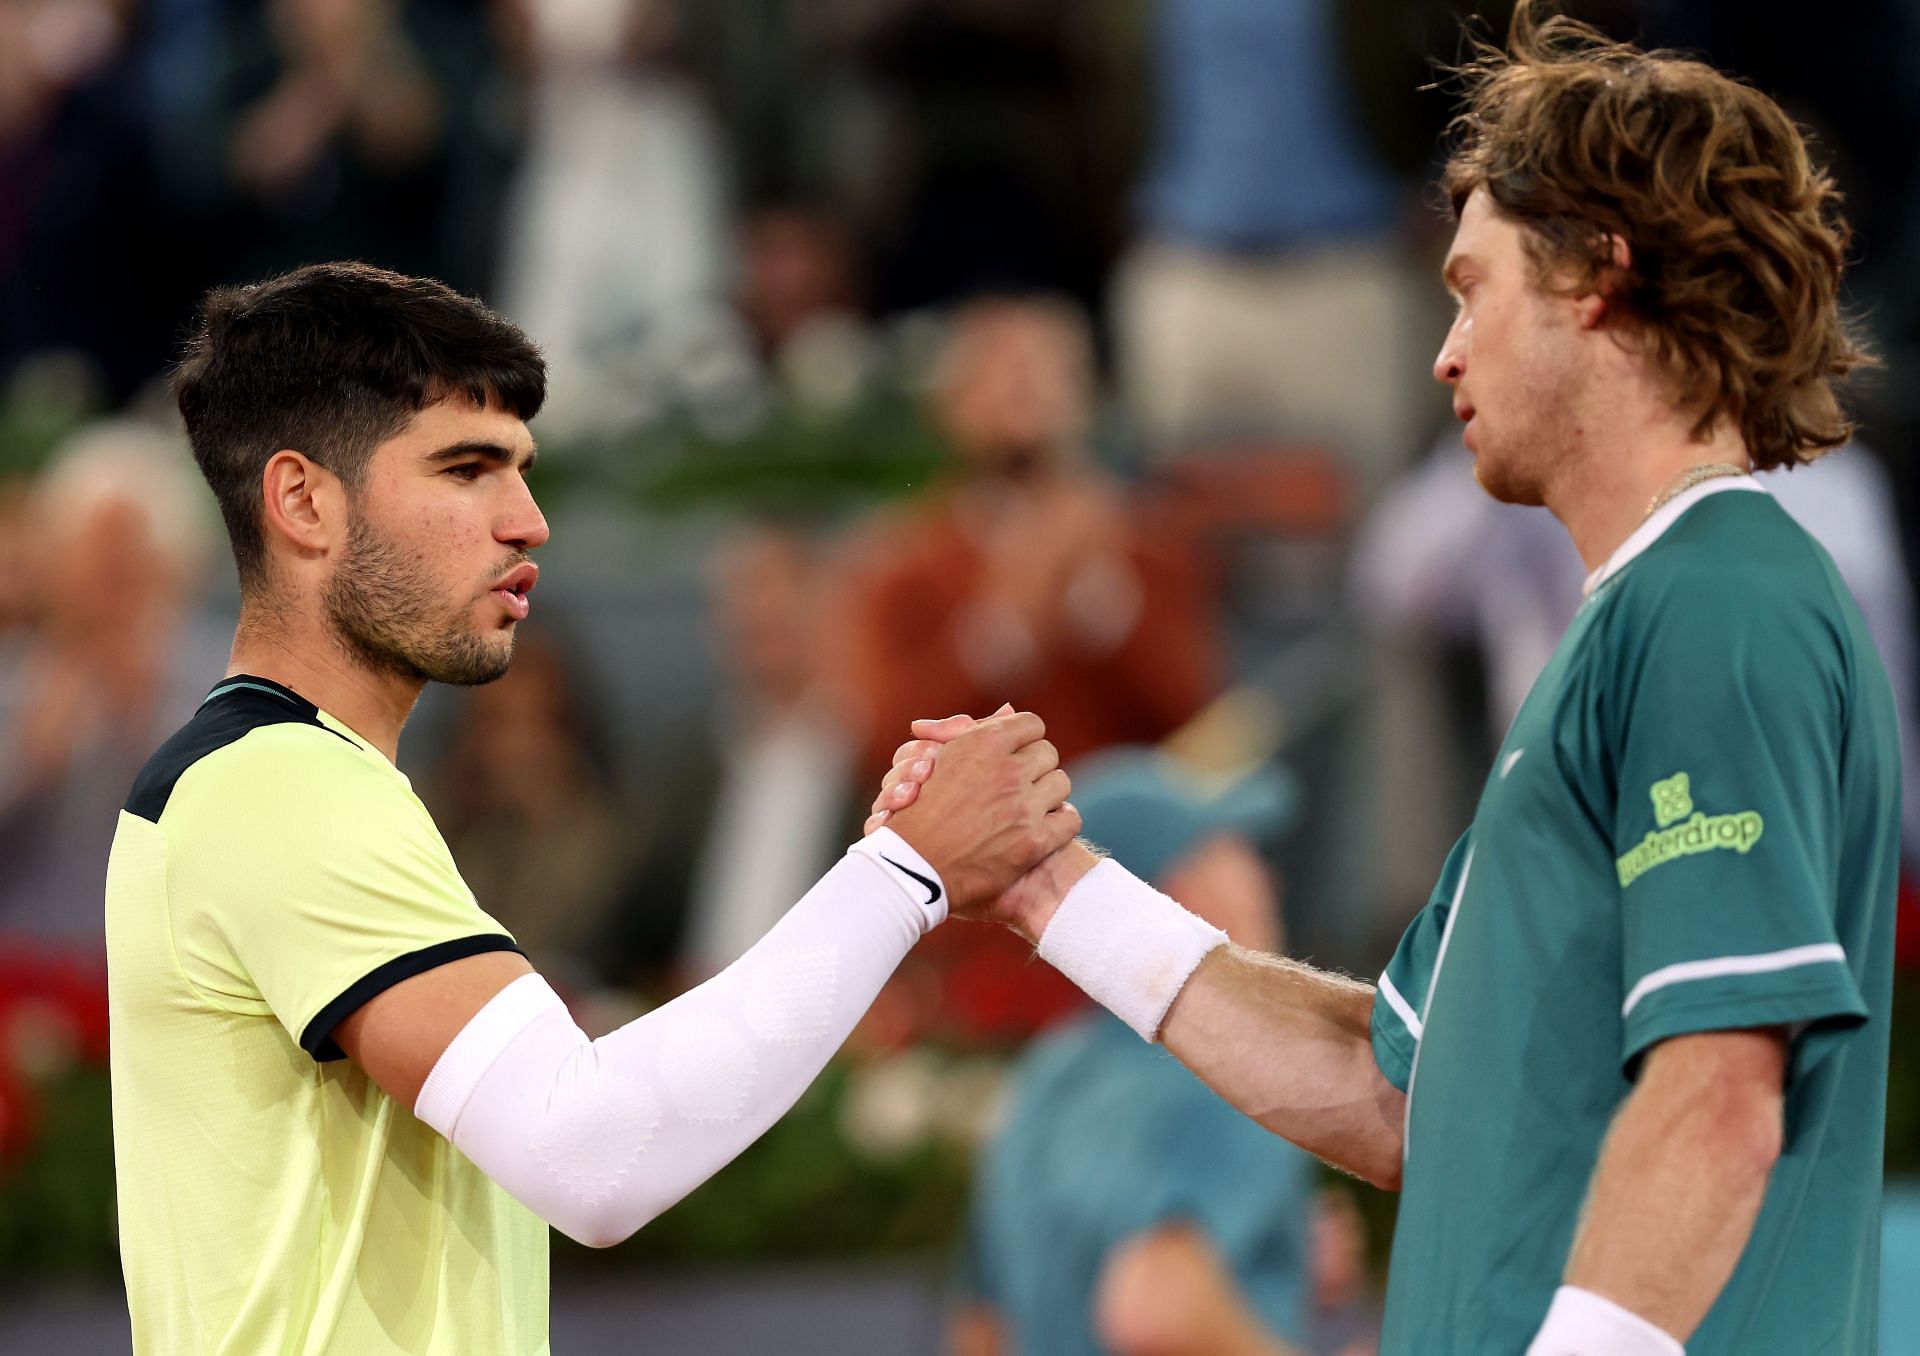 Carlos Alcaraz (L) and Andrey Rublev (R) after the conclusion of their Madrid Open quarterfinal